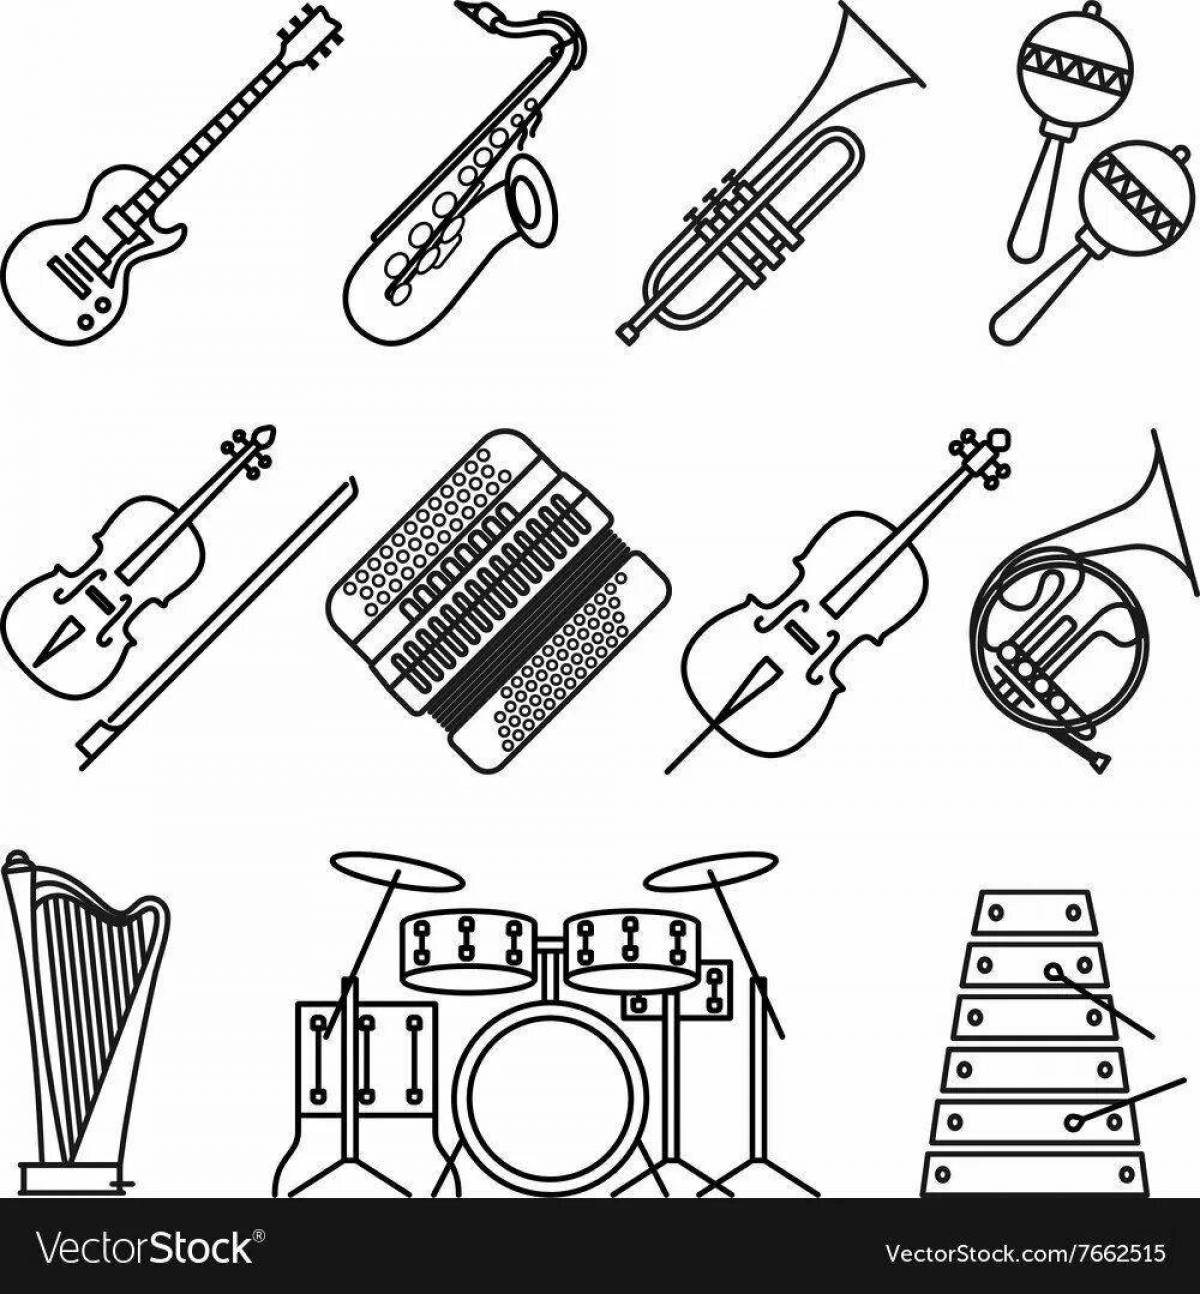 Charming symphony orchestra coloring page